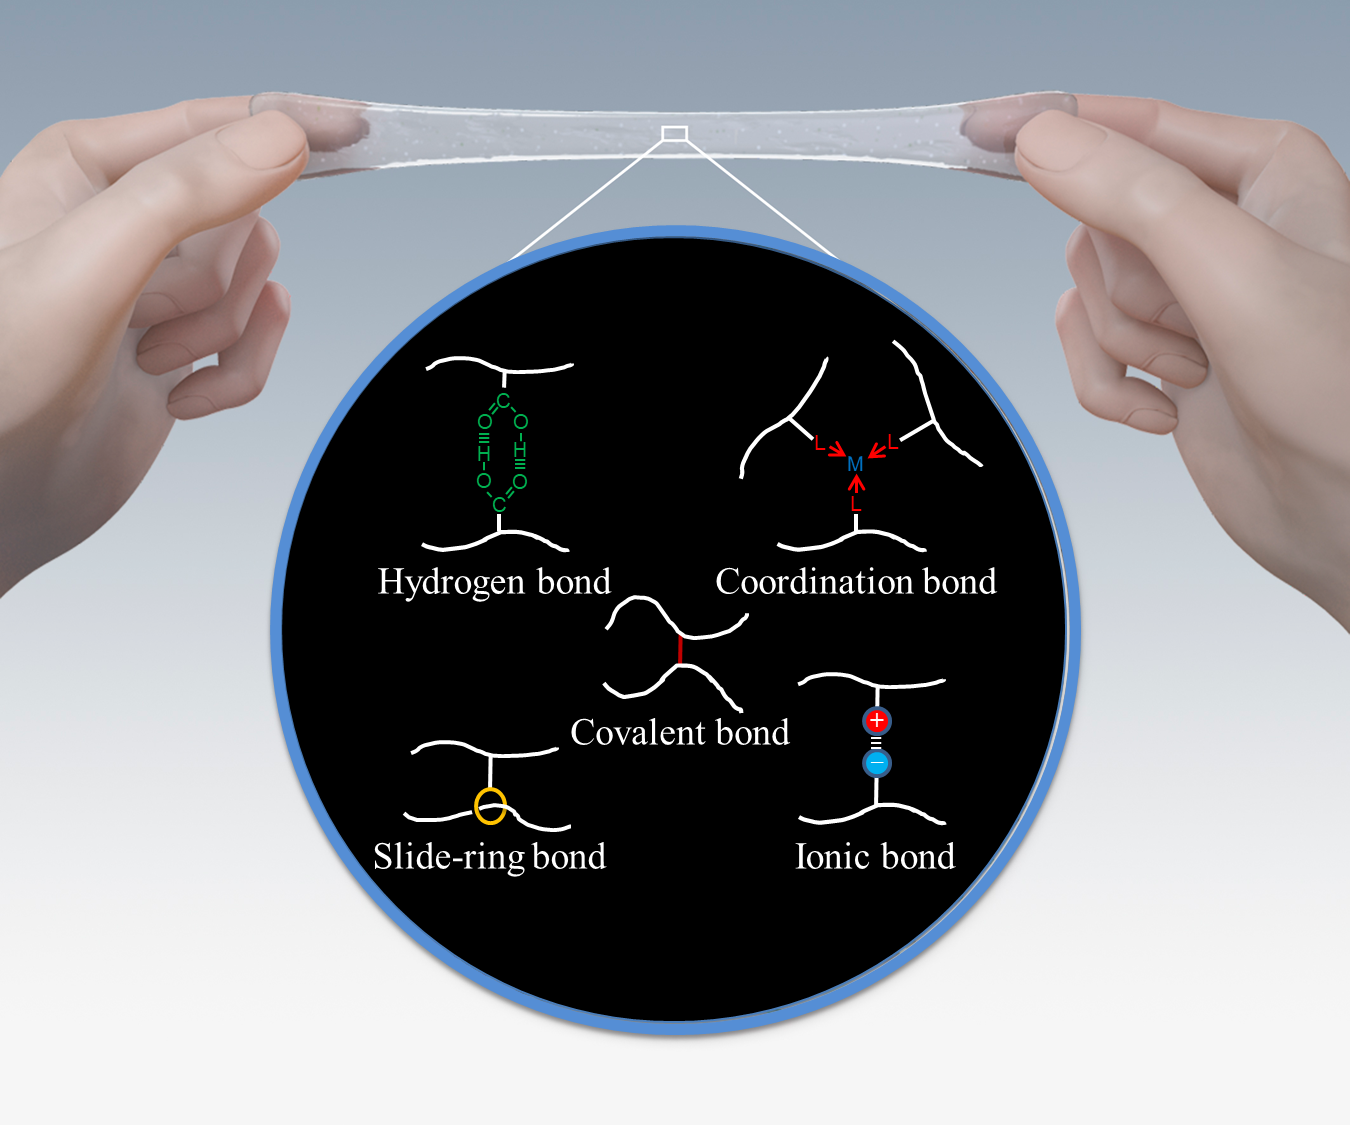 elastomers-develop-stronger-bonds-of-attachment-asia-research-news